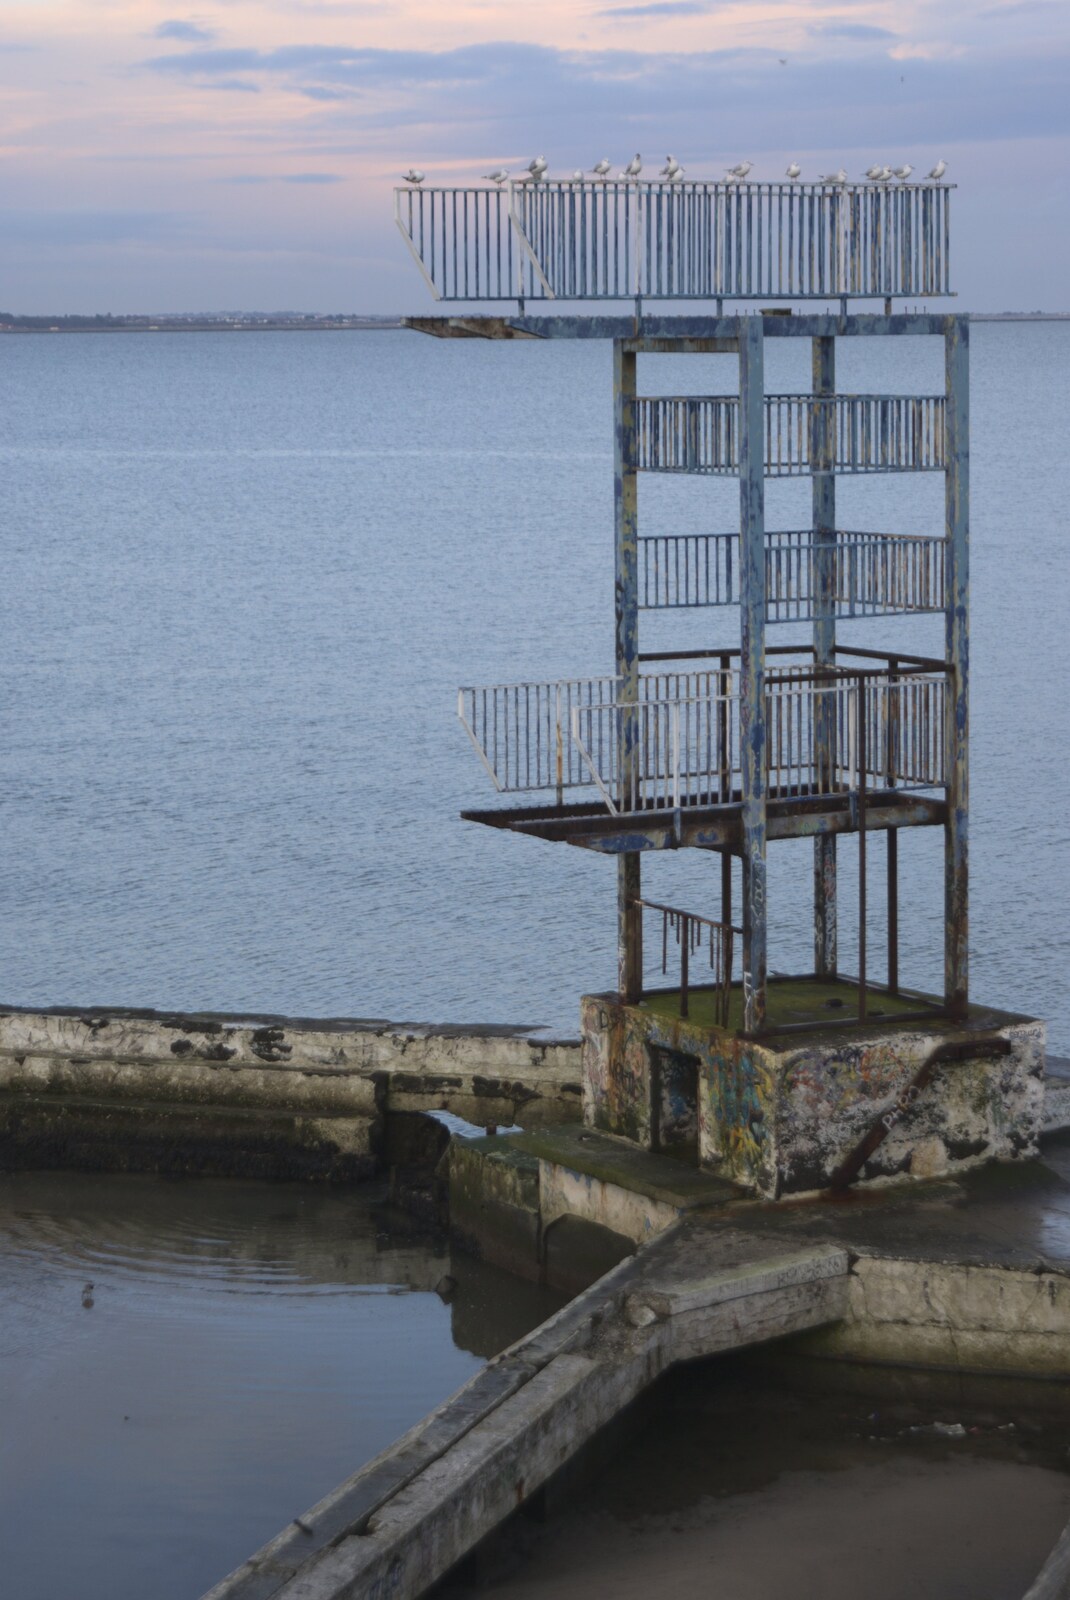 The diving platform from Monkstown Graffiti and Dereliction, County Dublin, Ireland - 26th December 2009